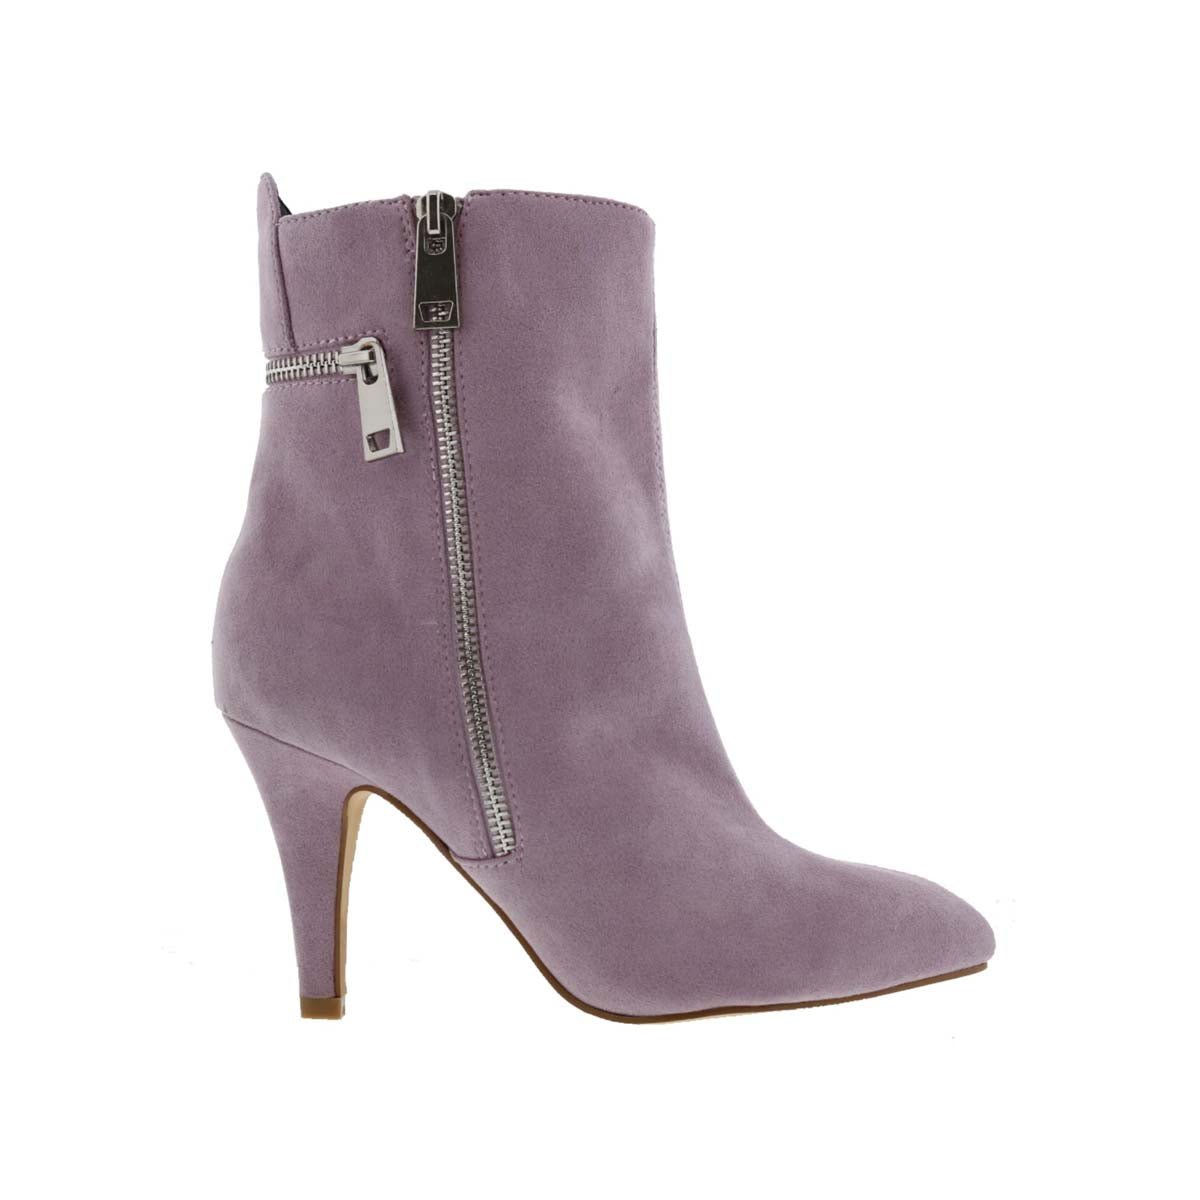 BELLINI CLAUDIA WOMEN BOOTS IN LAVENDER MICROSUEDE - TLW Shoes